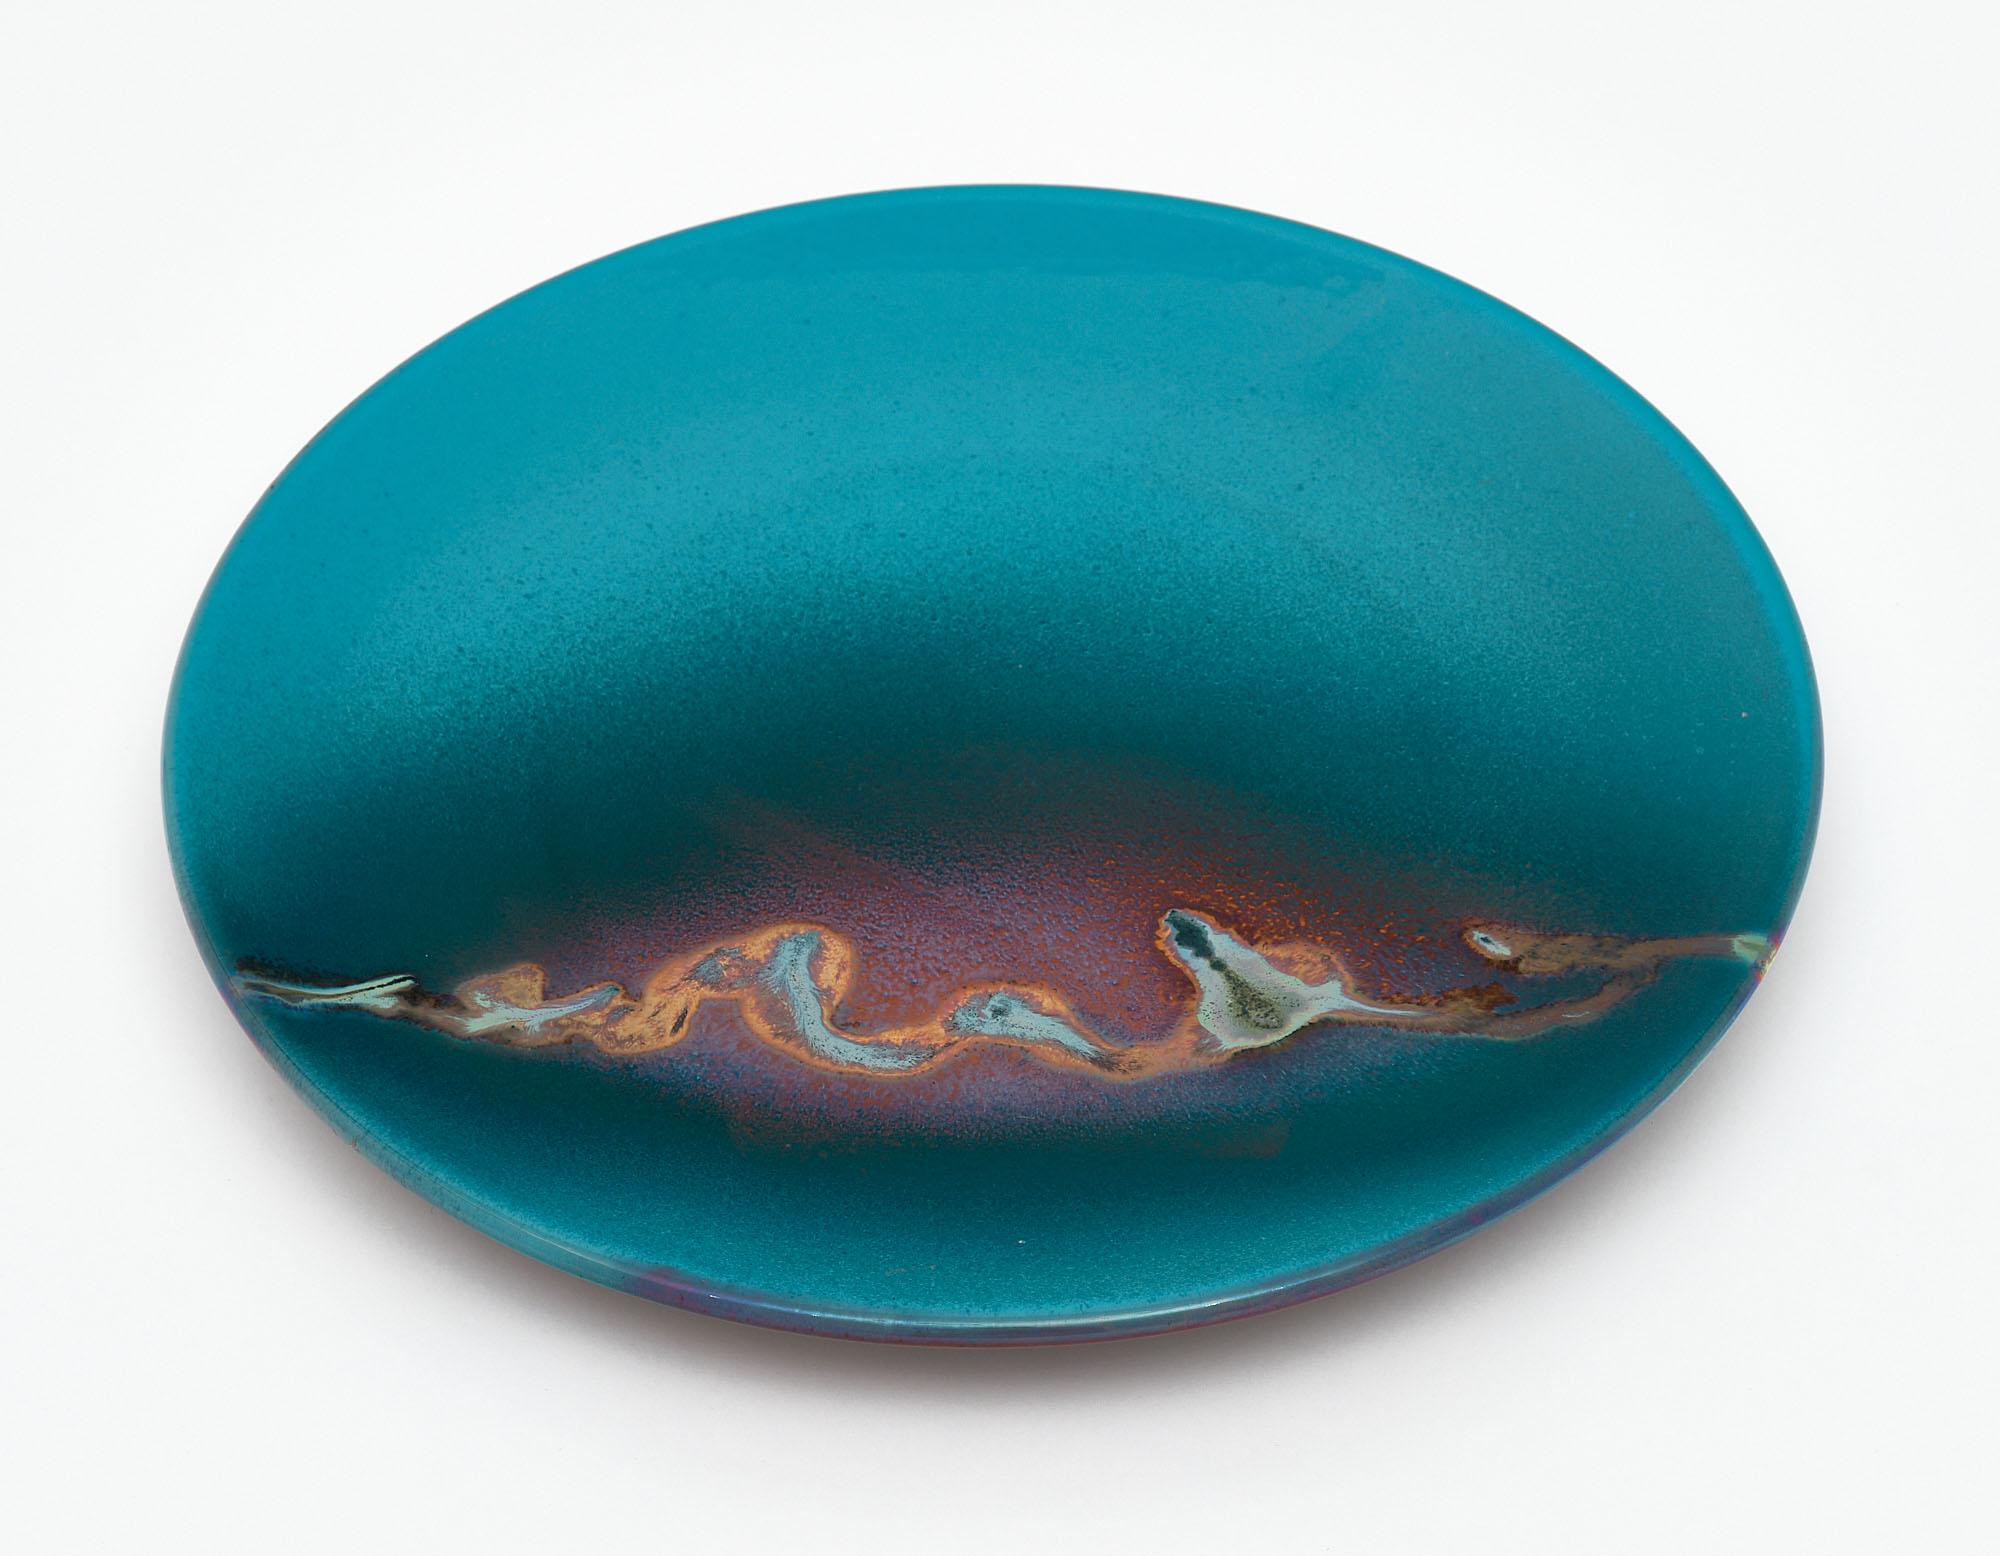 Charger from Vallauris, France made of glazed ceramic. This piece is signed.